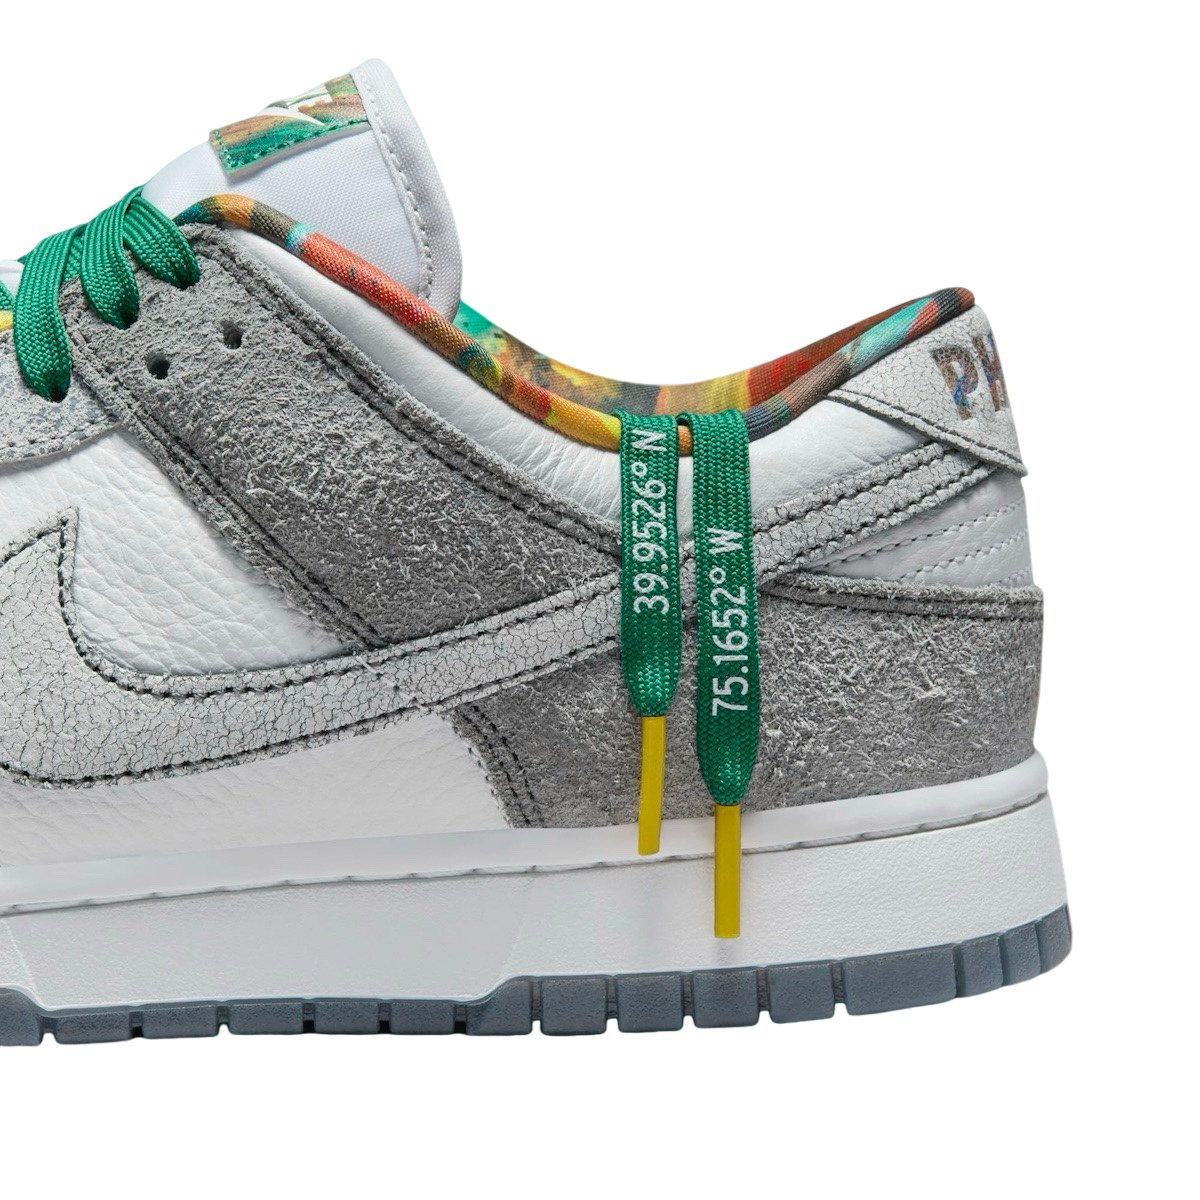 Nike Dunk Low Premium Philly